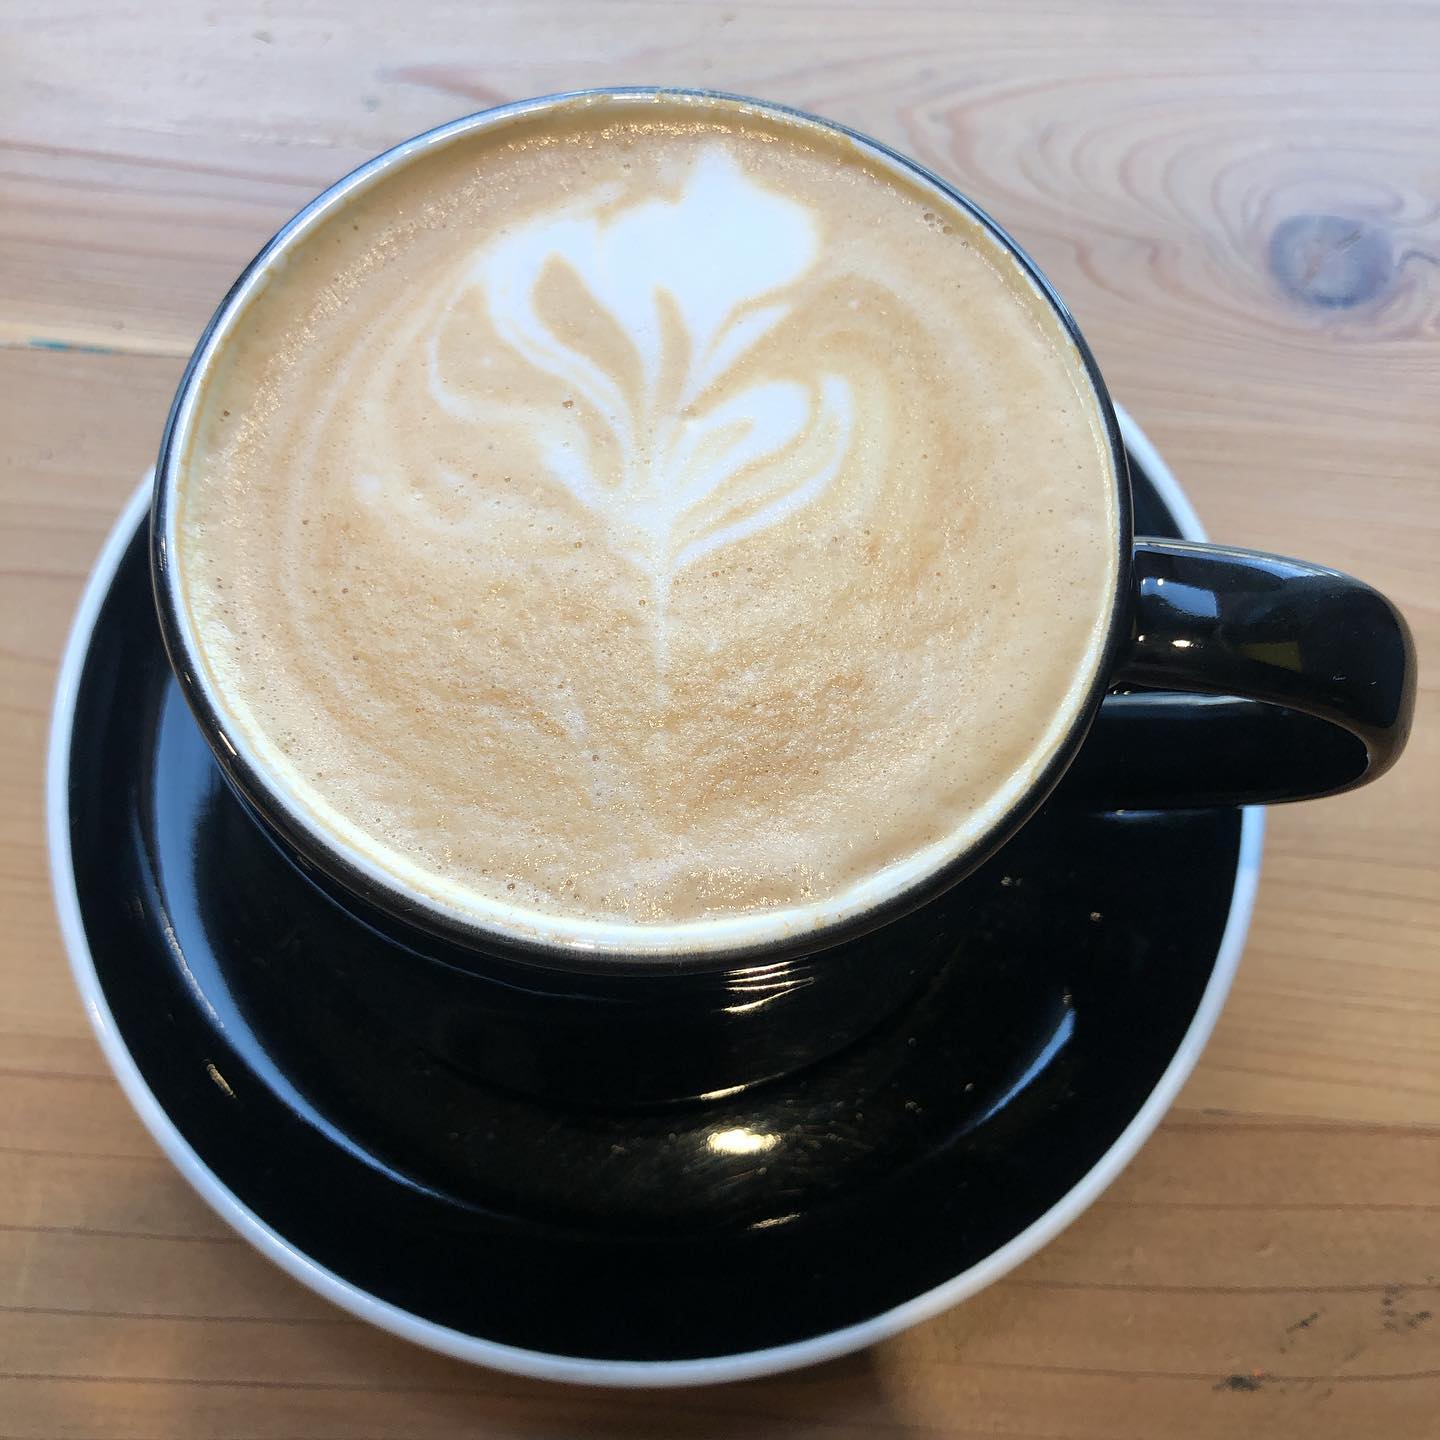 Last latte of 2019 — it’s been a year!